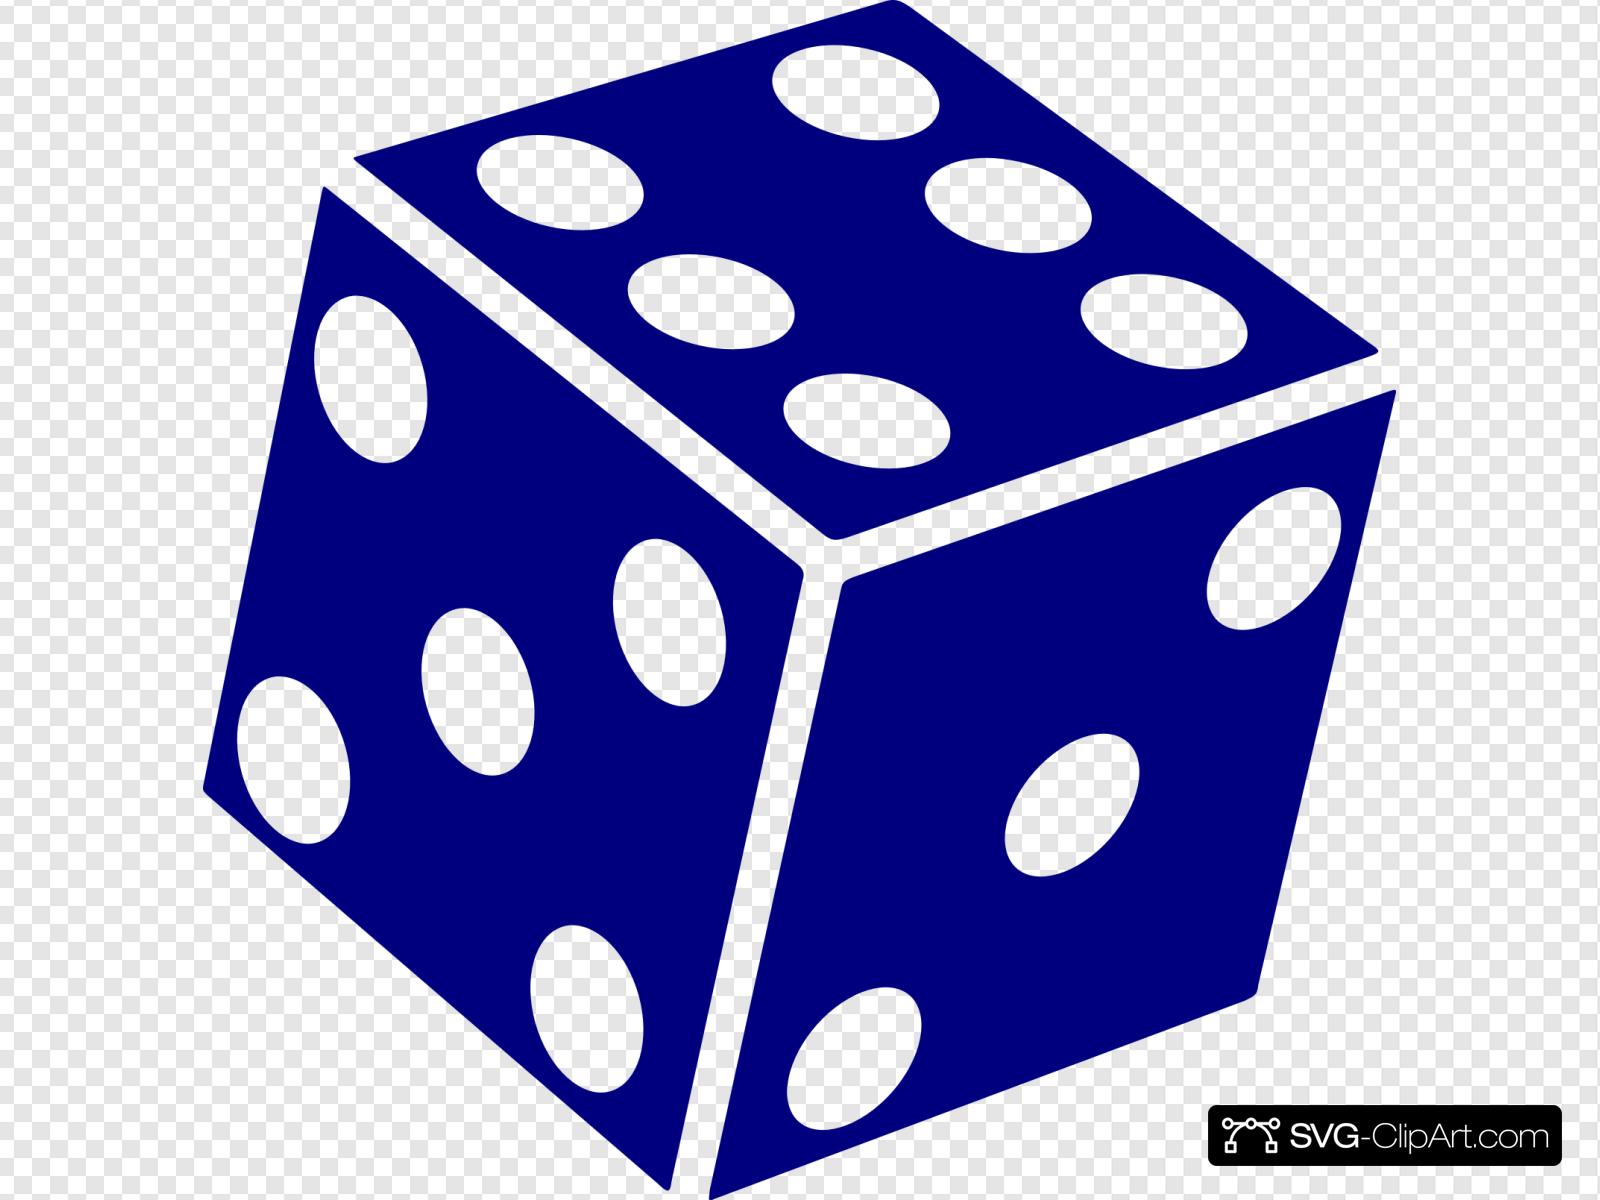 Six Sided Dice Clip art, Icon and SVG